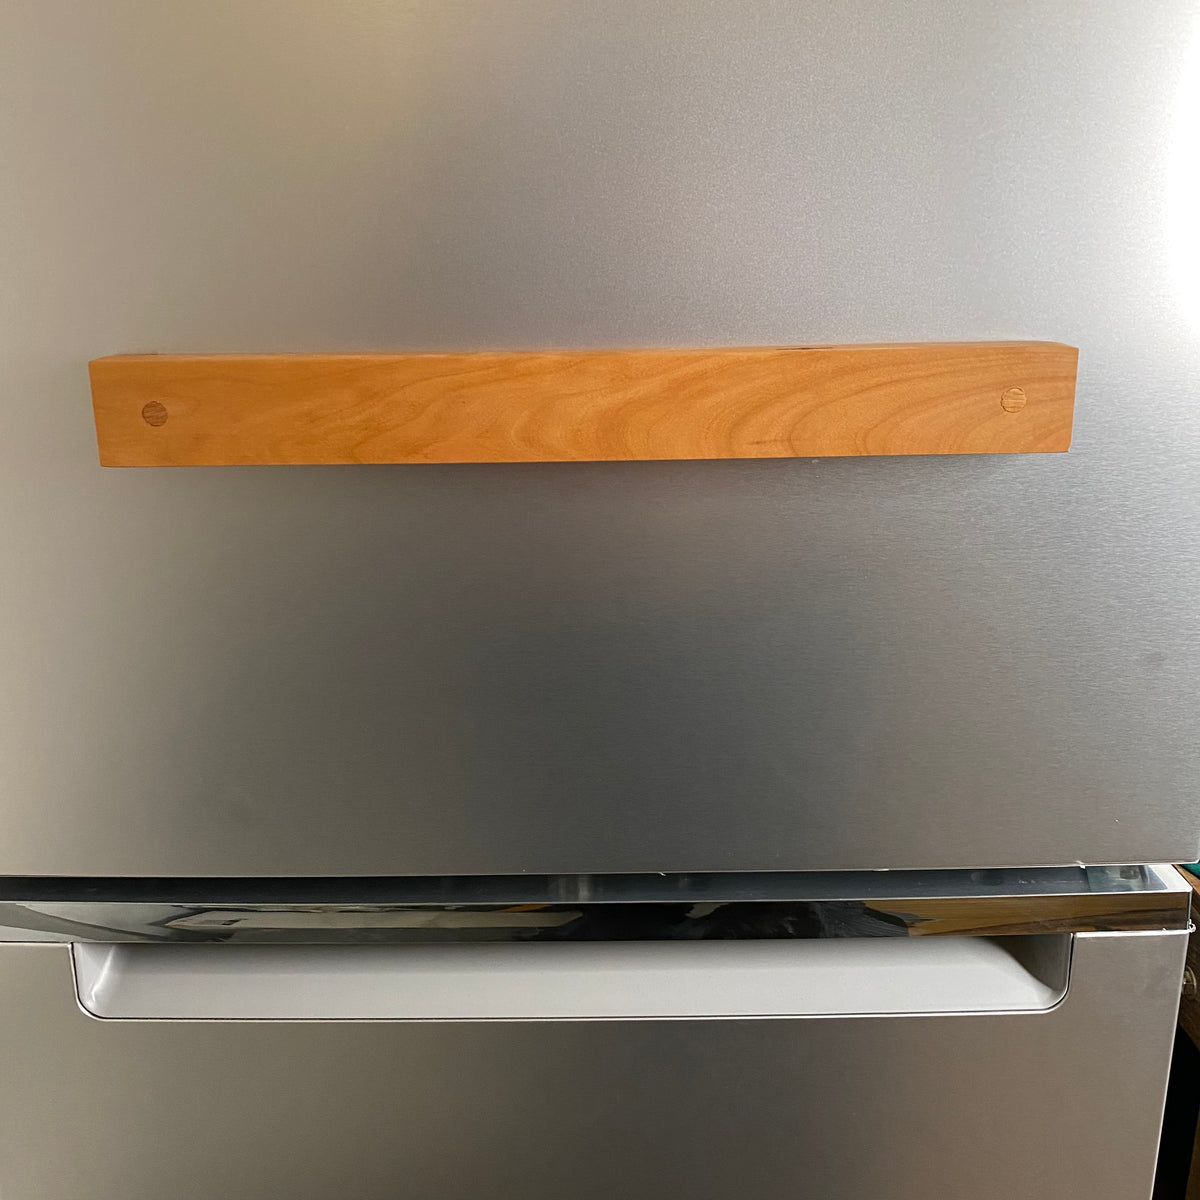 wooDsom 16" Refrigerator Mounted Magnetic Strip - Cherry